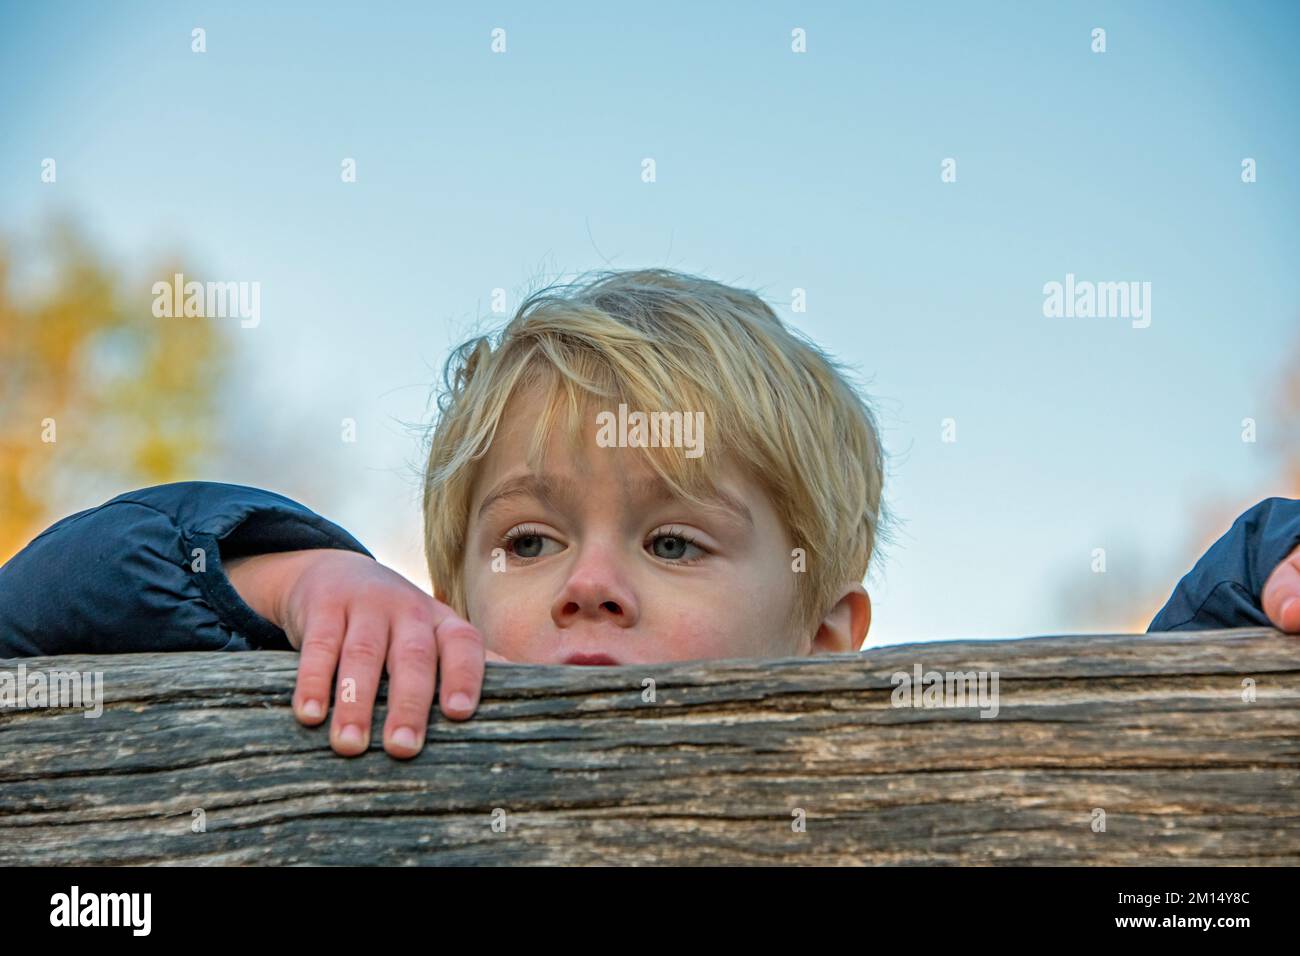 Near view of a young child at the playground on a sunny day Stock Photo